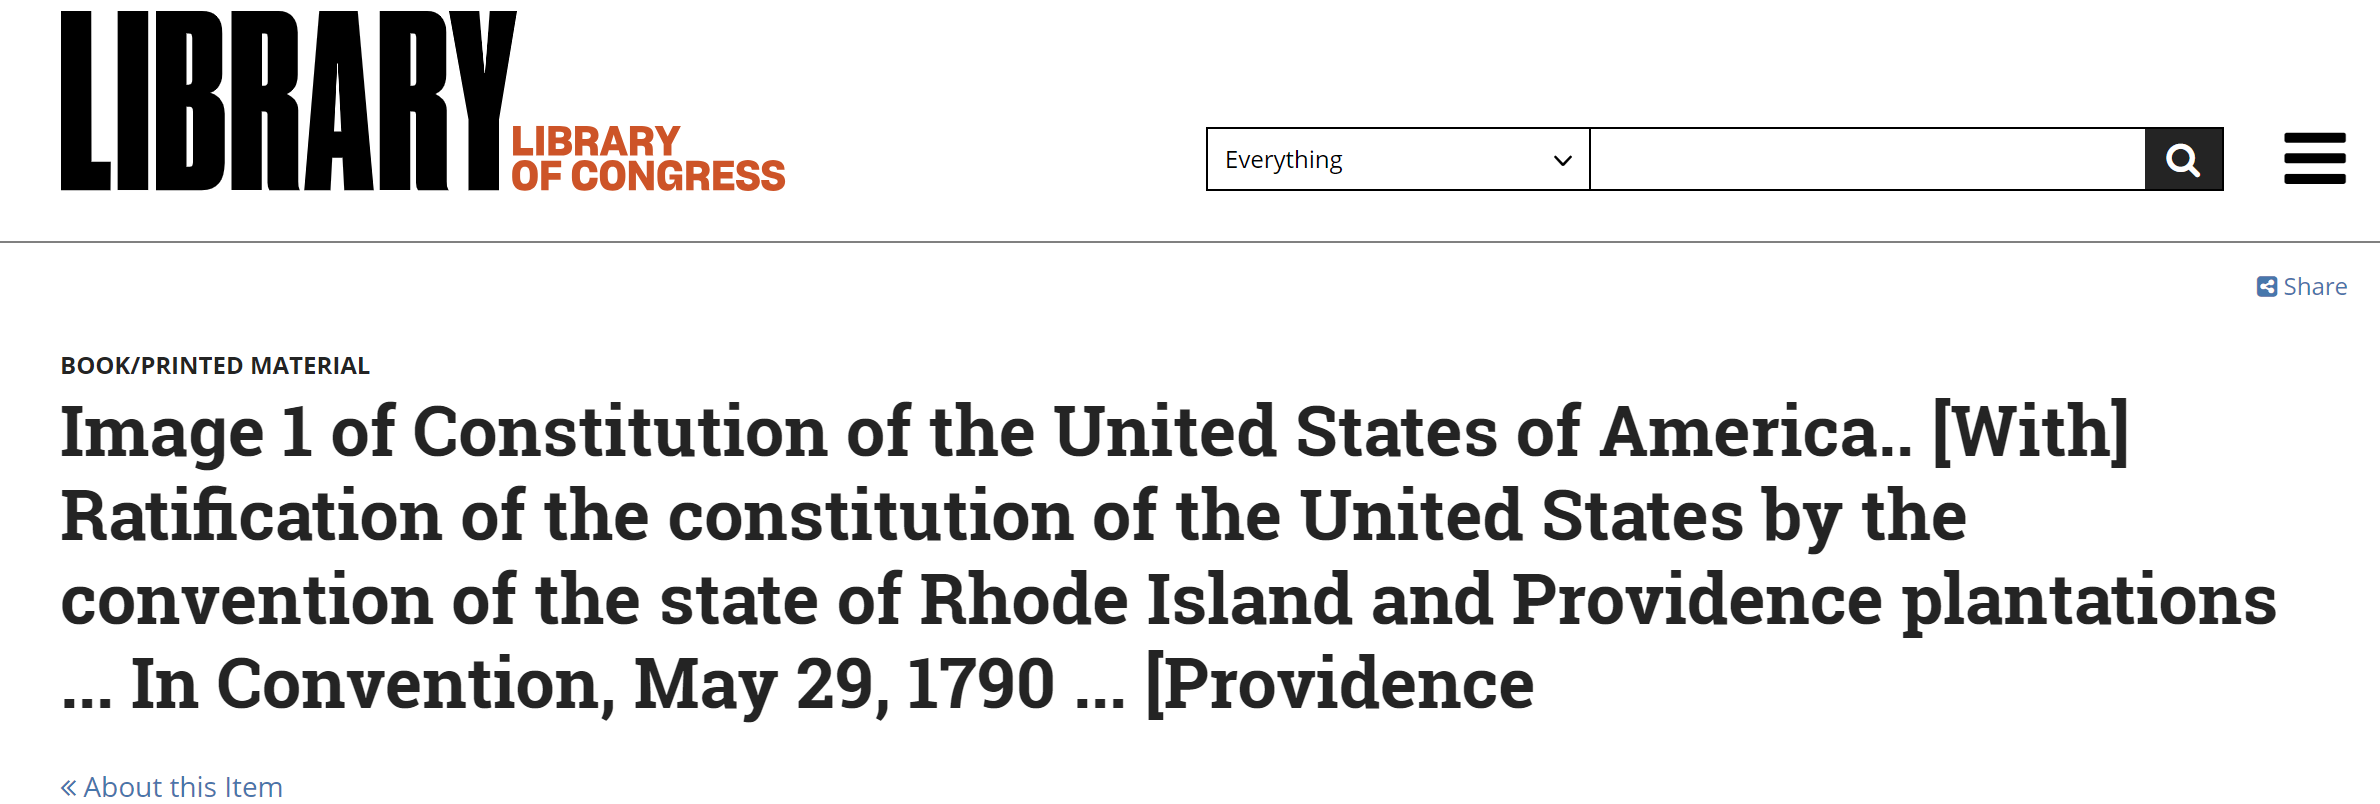 Image 1 of Constitution of the United States of America.. [With]  Ratification of the constitution of the United States by the convention of  the state of Rhode Island and Providence plantations